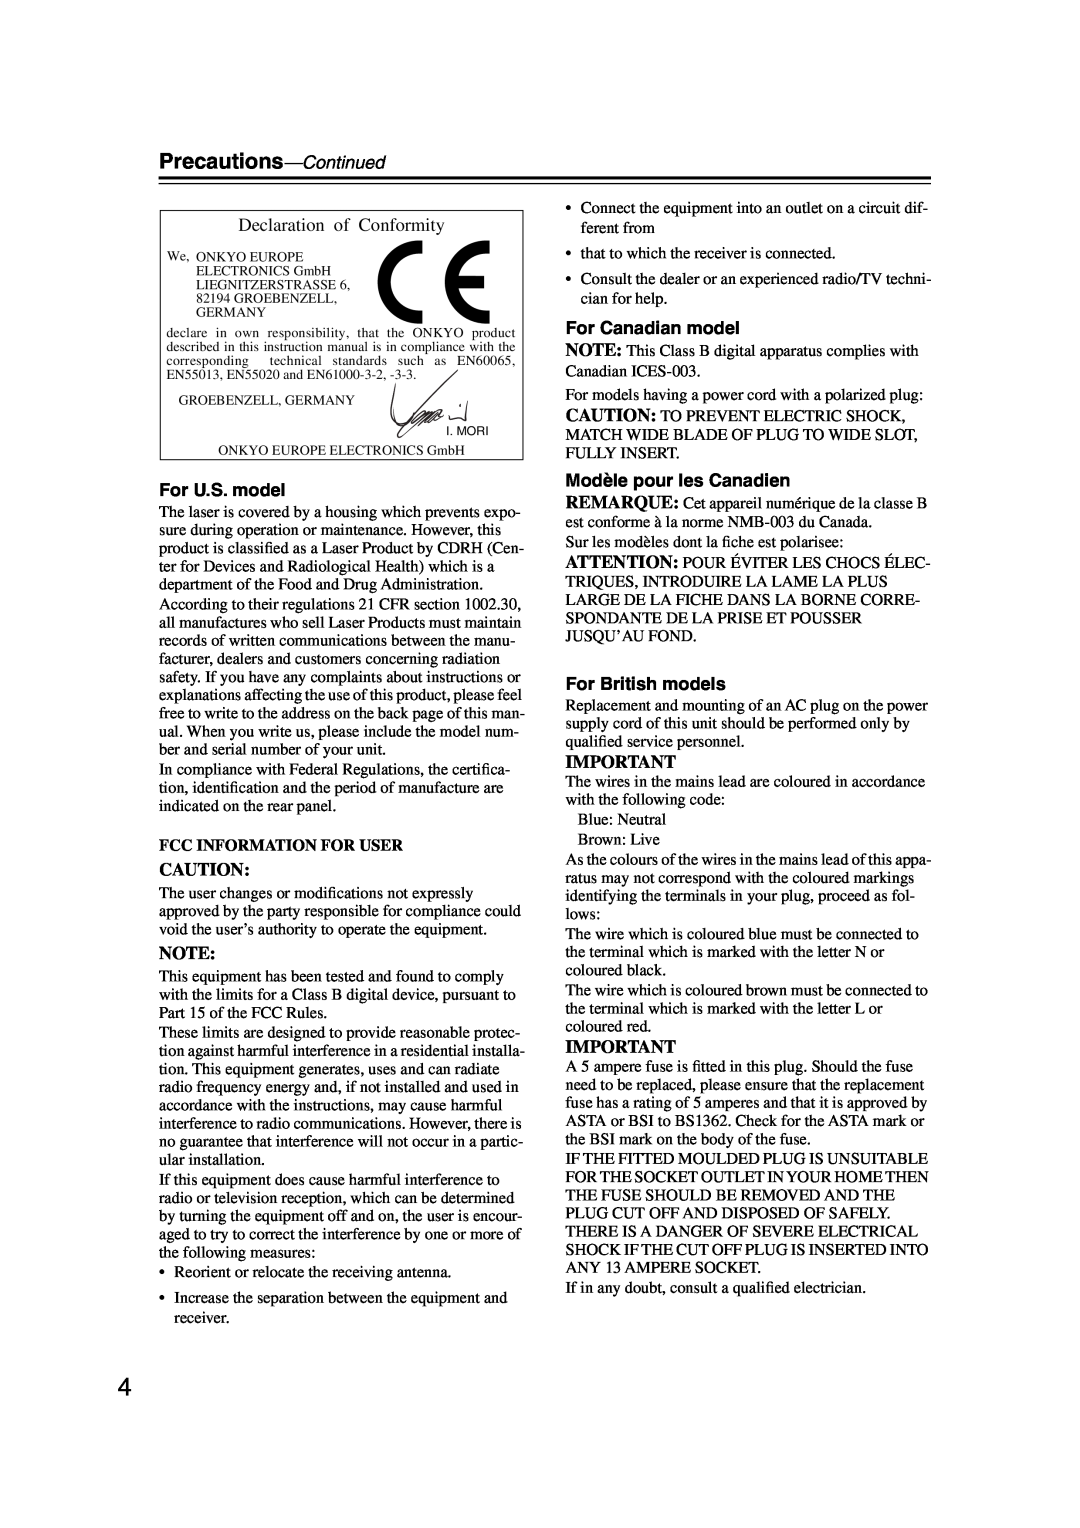 Onkyo DX-C390 Precautions-Continued, Declaration of Conformity, For U.S. model, For Canadian model, For British models 